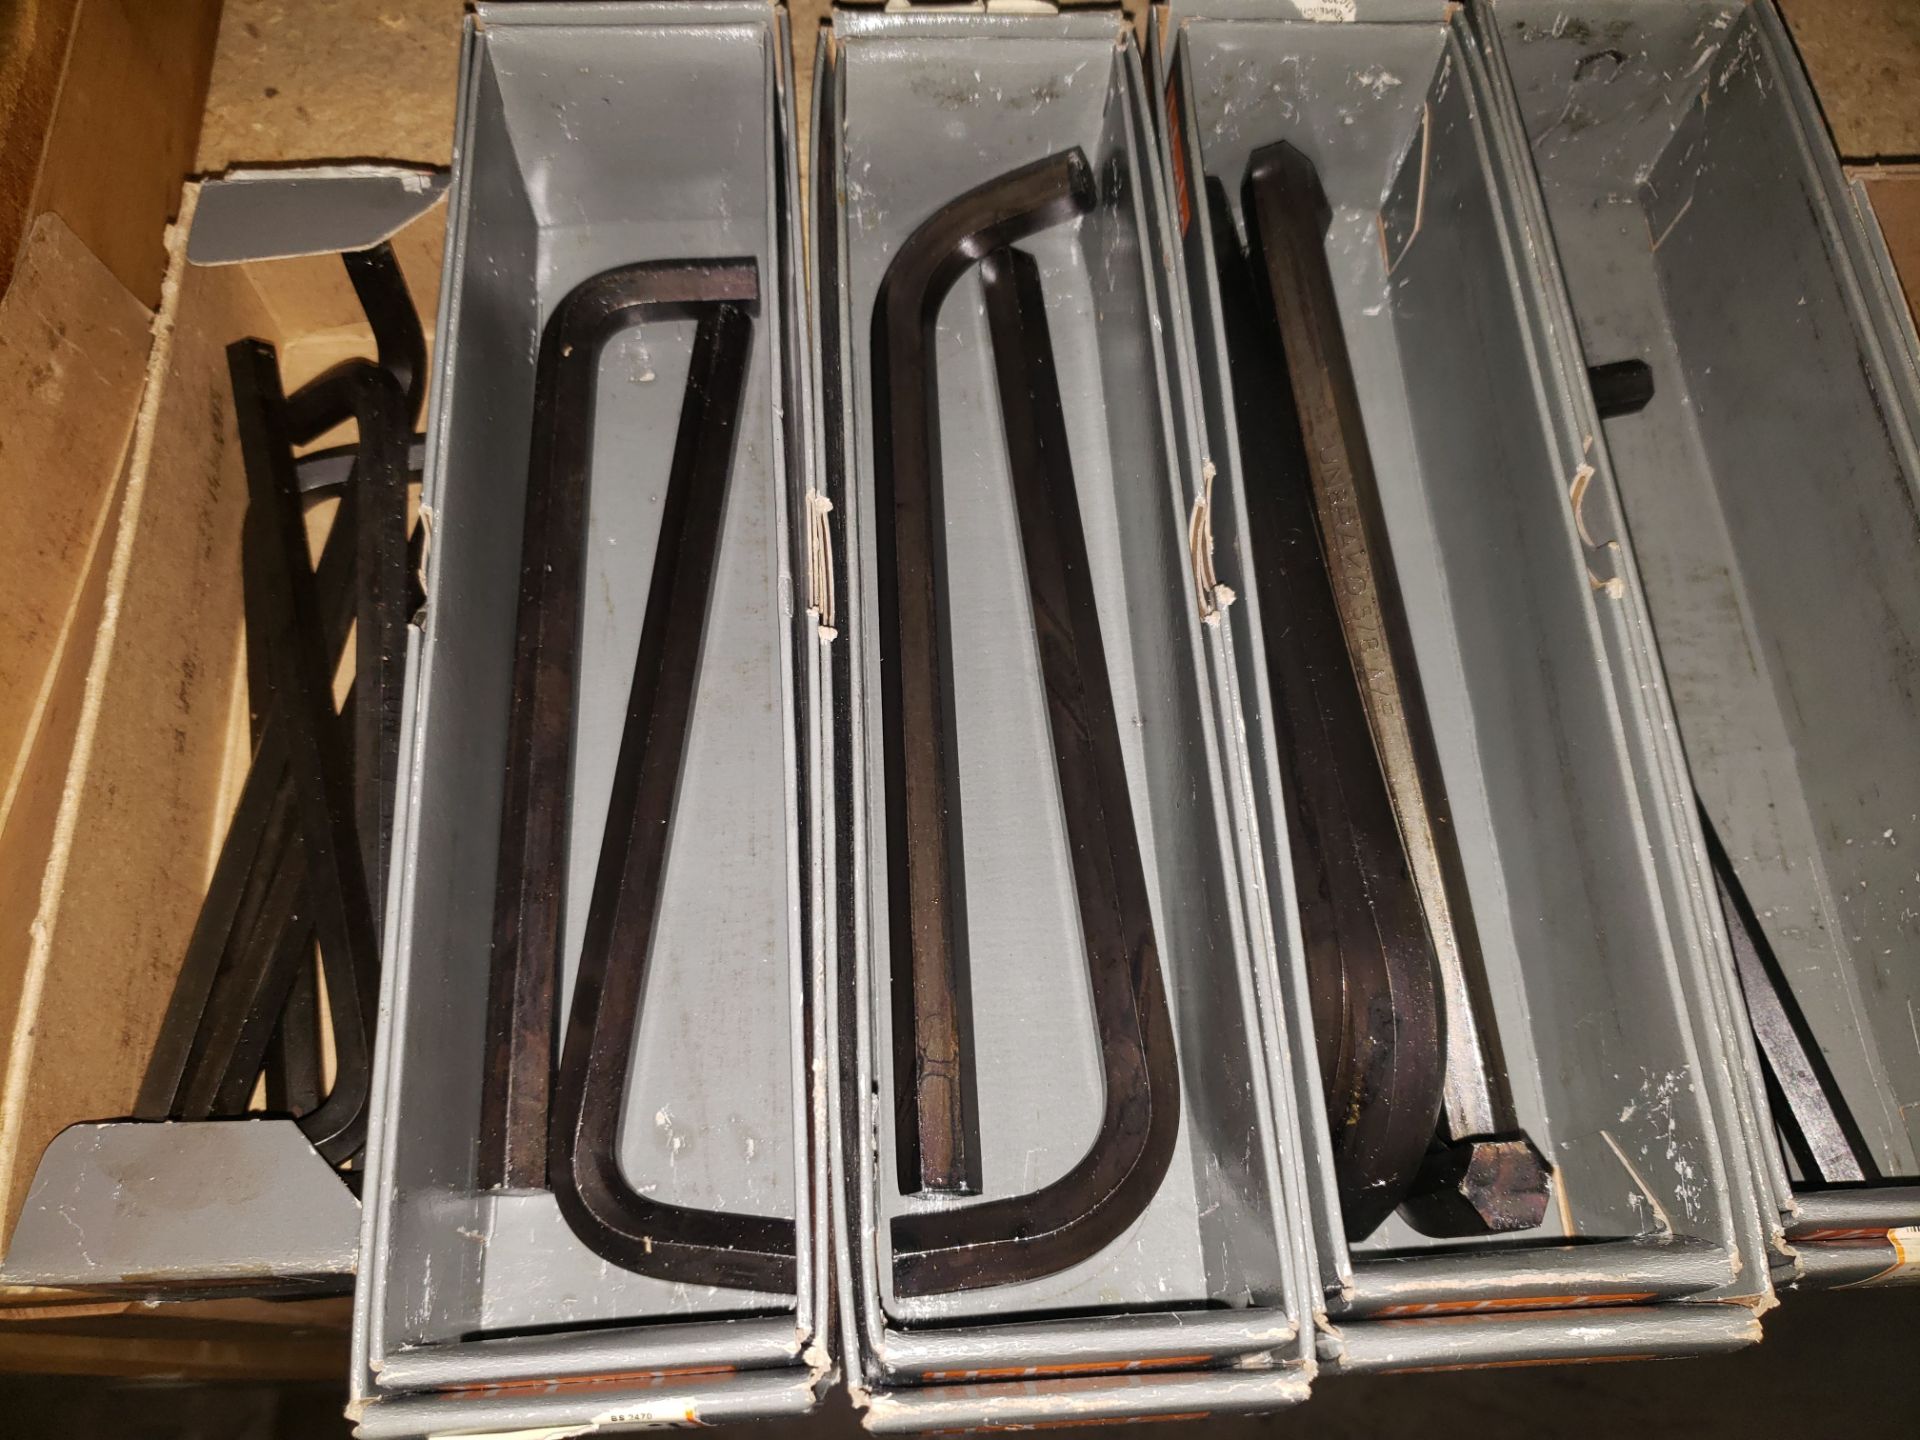 LARGE QUANTITY OF ALLEN WRENCHES - Image 4 of 4